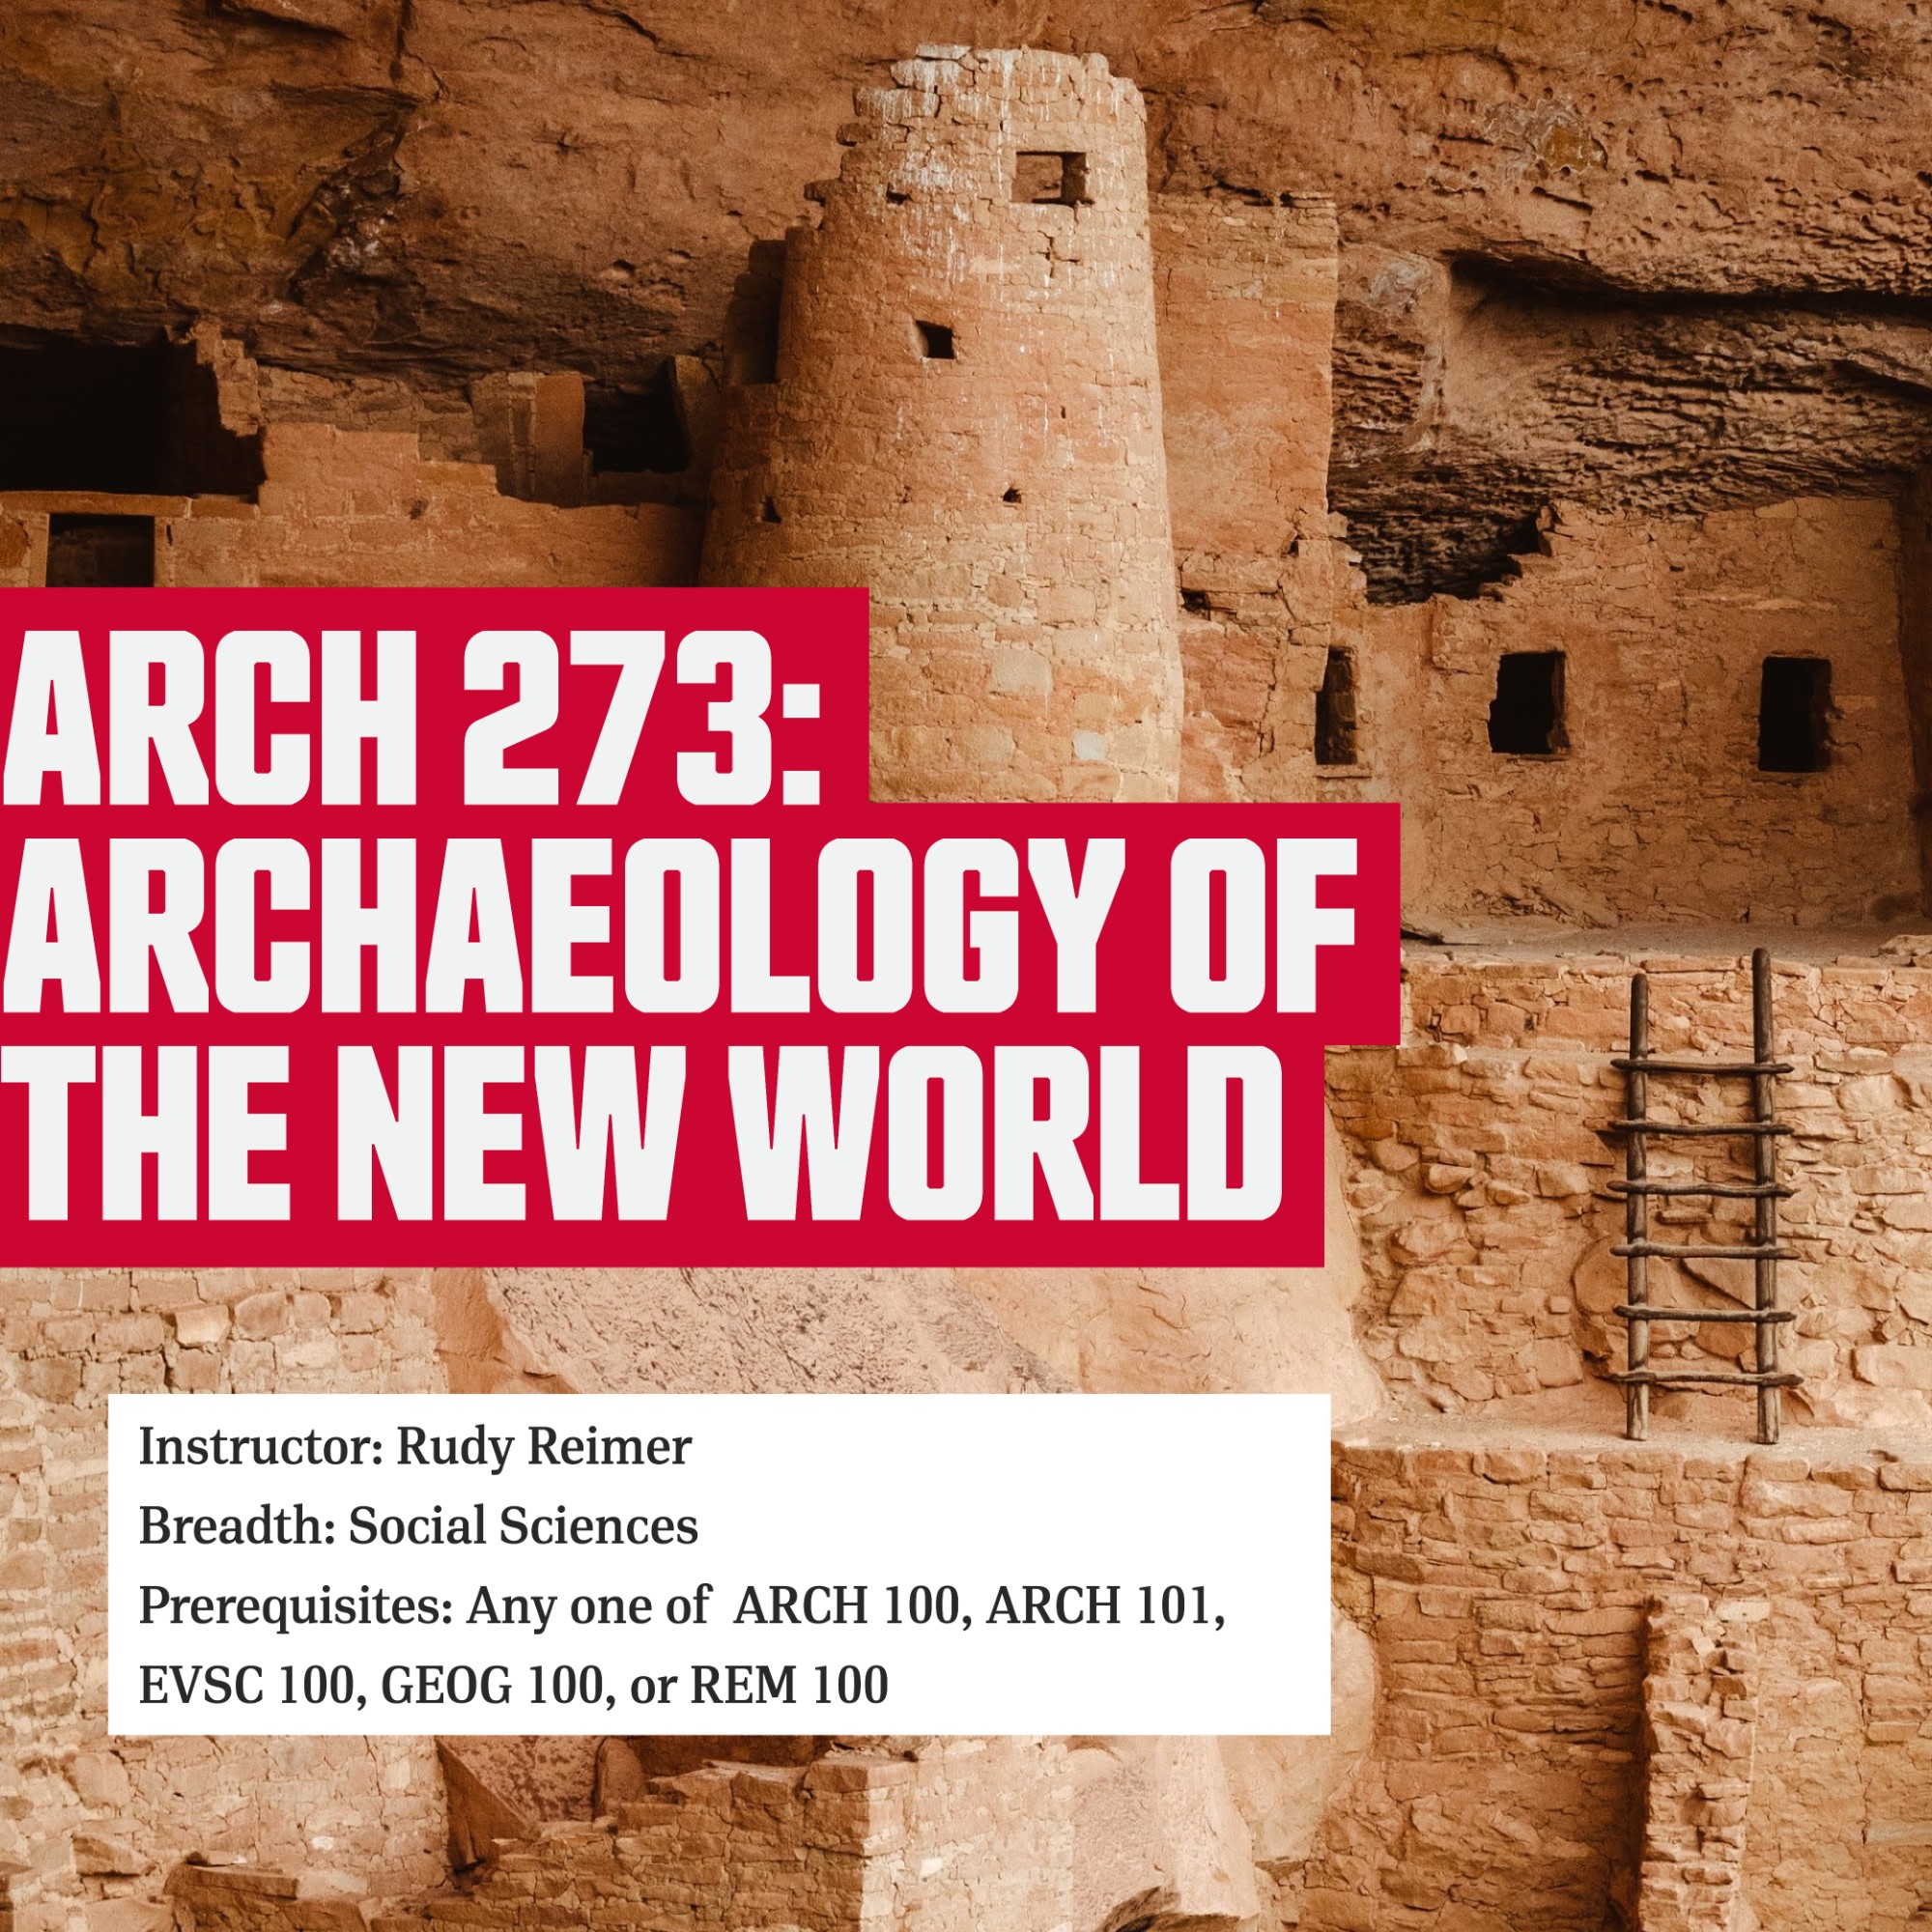 ARCH 273: Archaeology of the new world